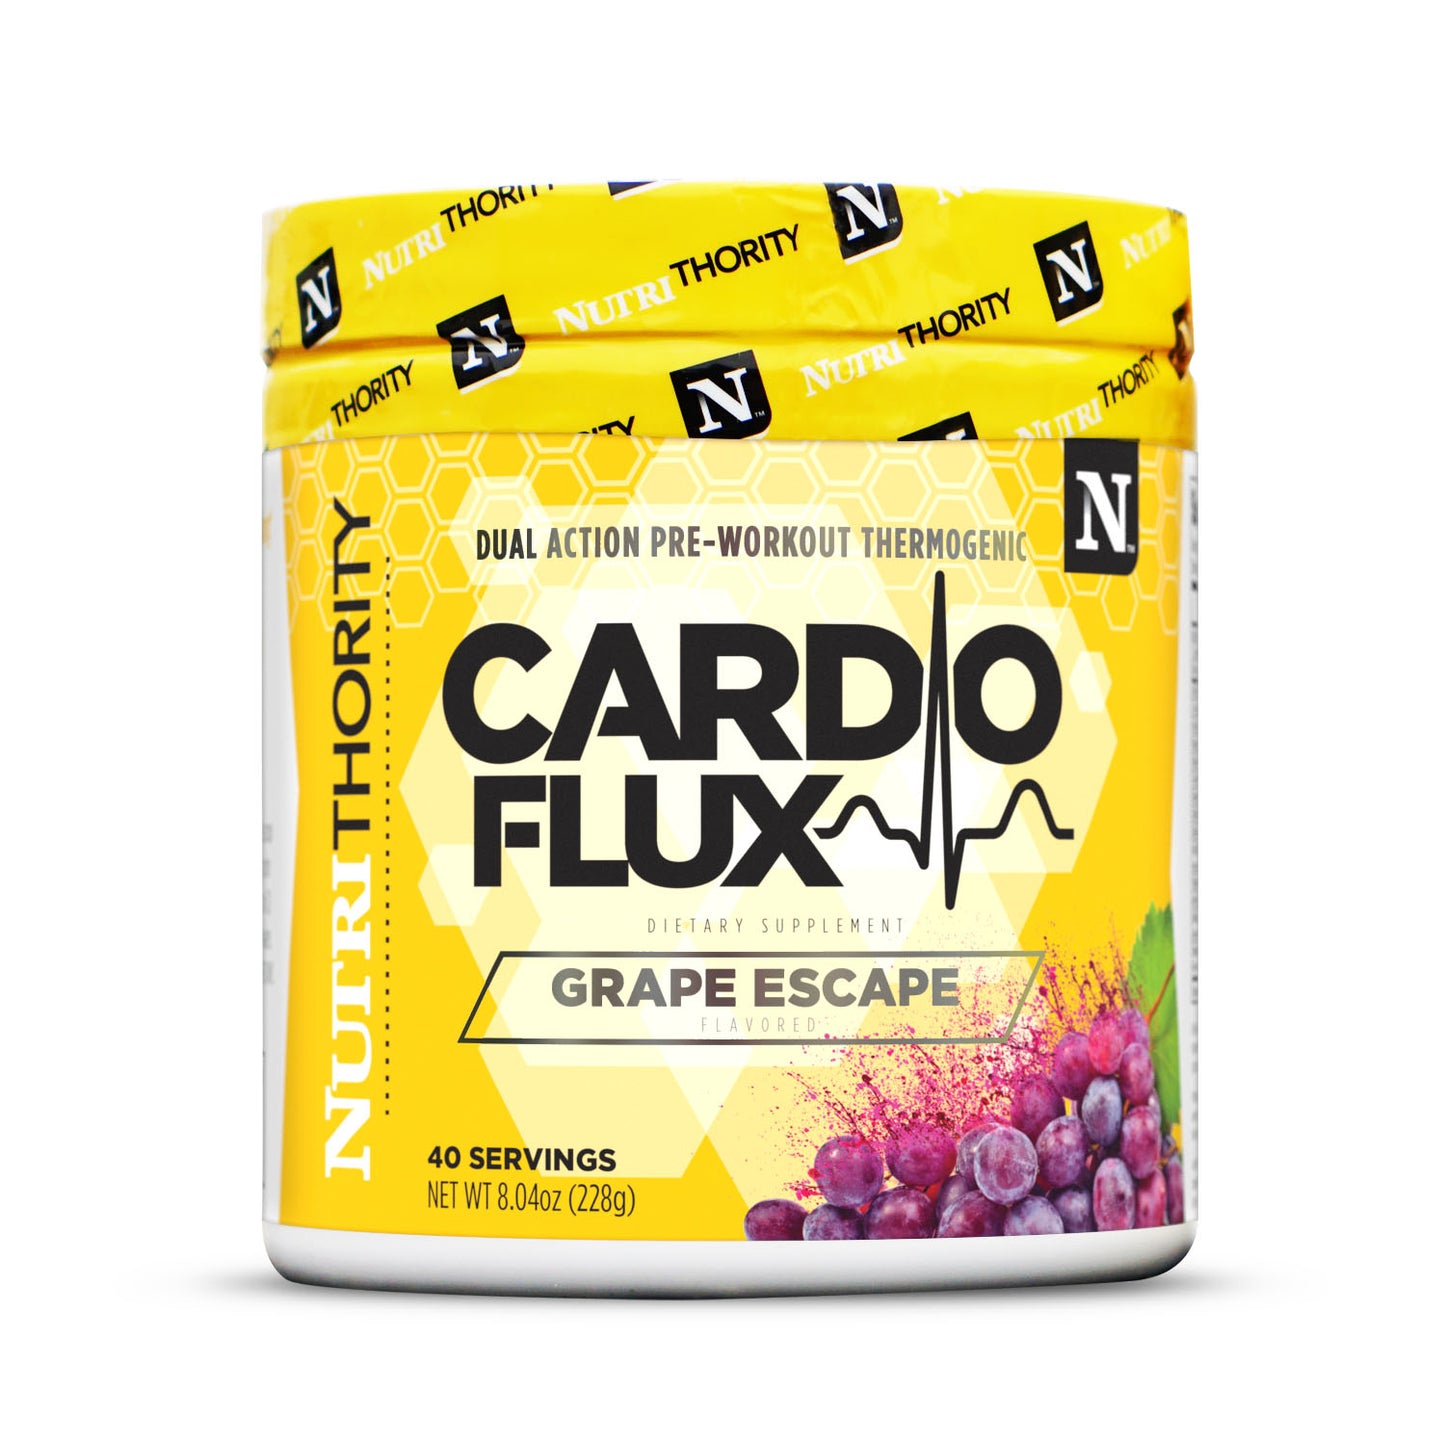 CardioFlux - Dual Action Pre-Workout Thermogenic